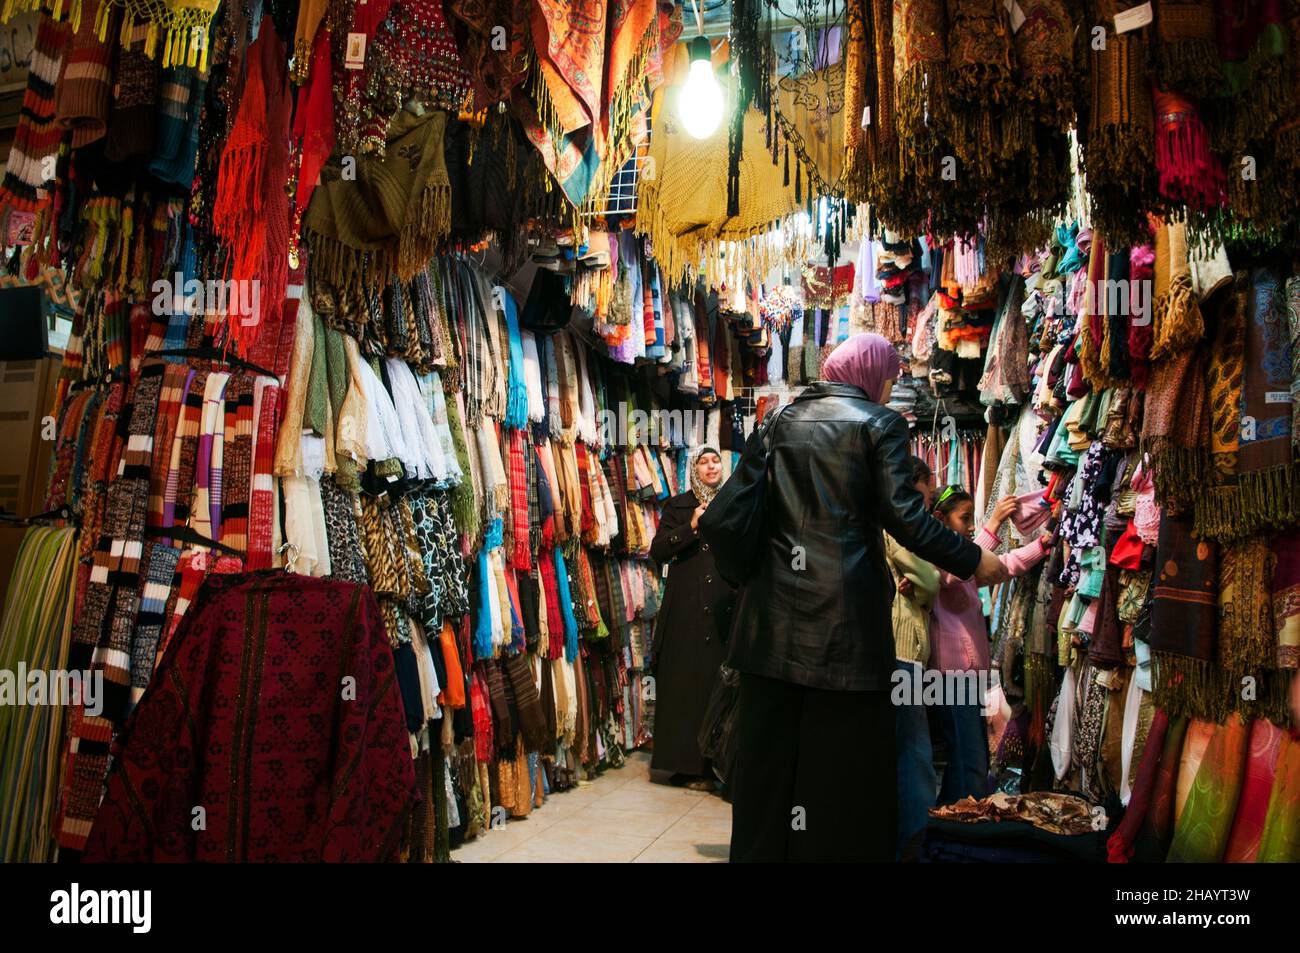 Palestinian women shopping in a small clothing store in the Muslim ...